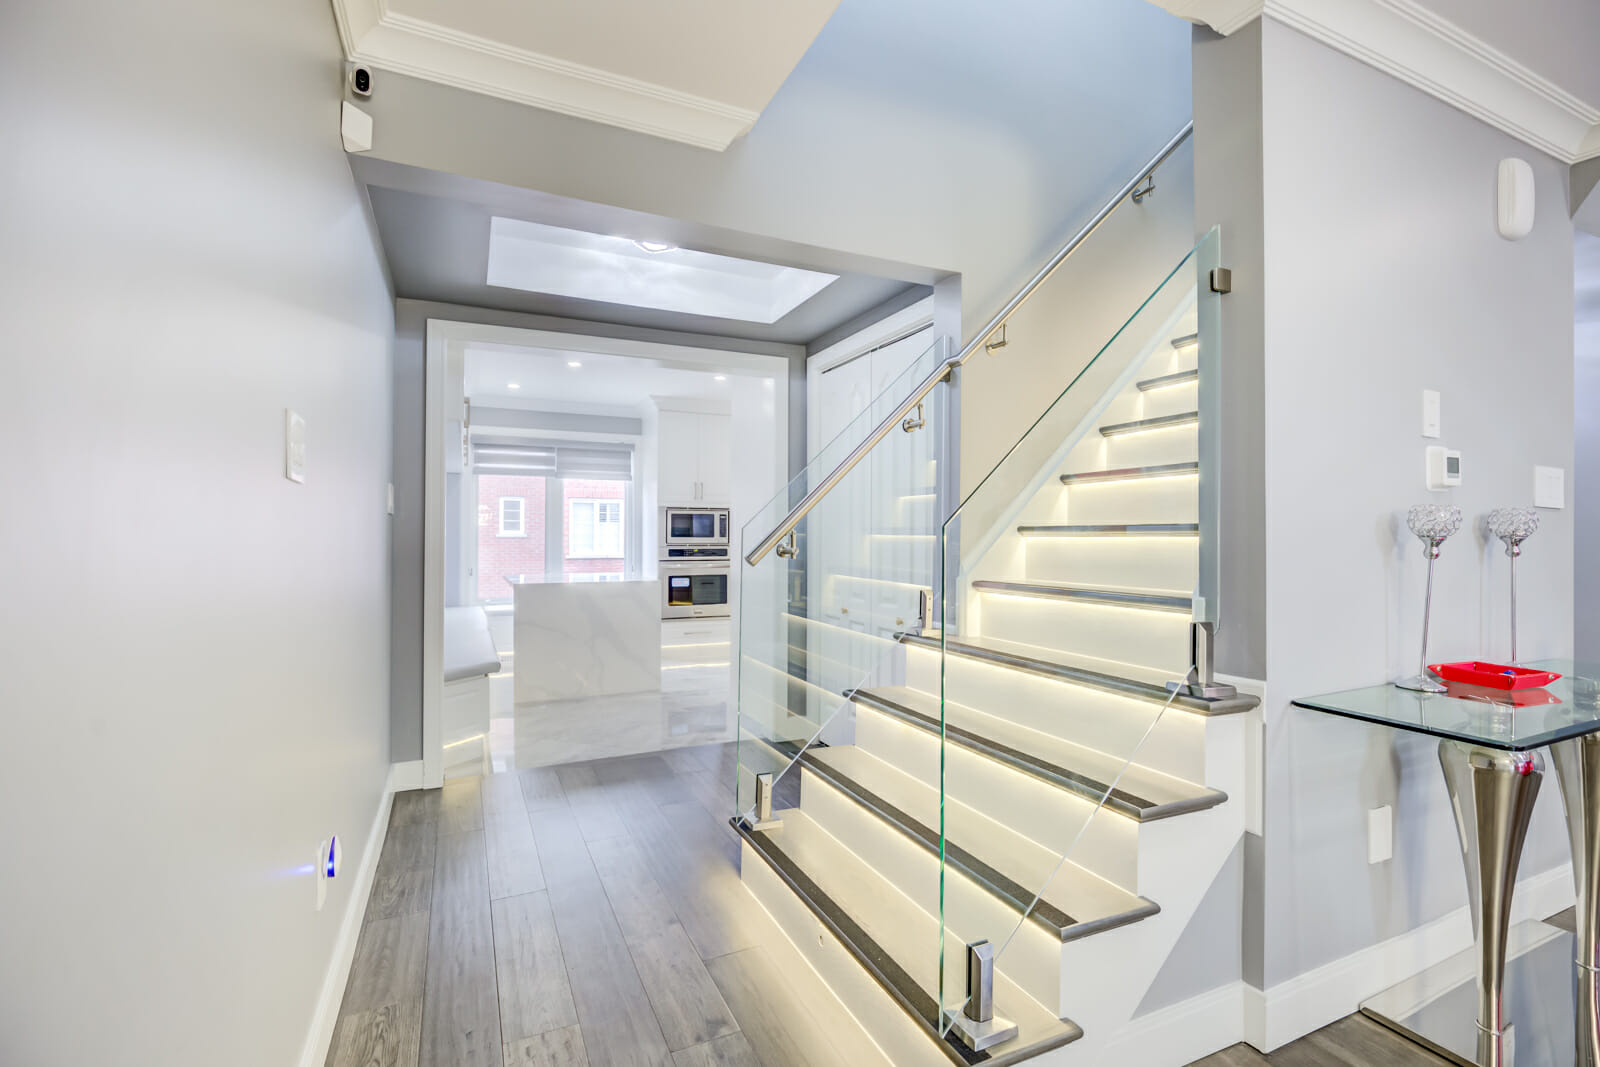 In the Toronto home restoration by Desa Contracting and Restoration, you'll find a staircase illuminated with LED lights, a modern kitchen, and a convenient side table.